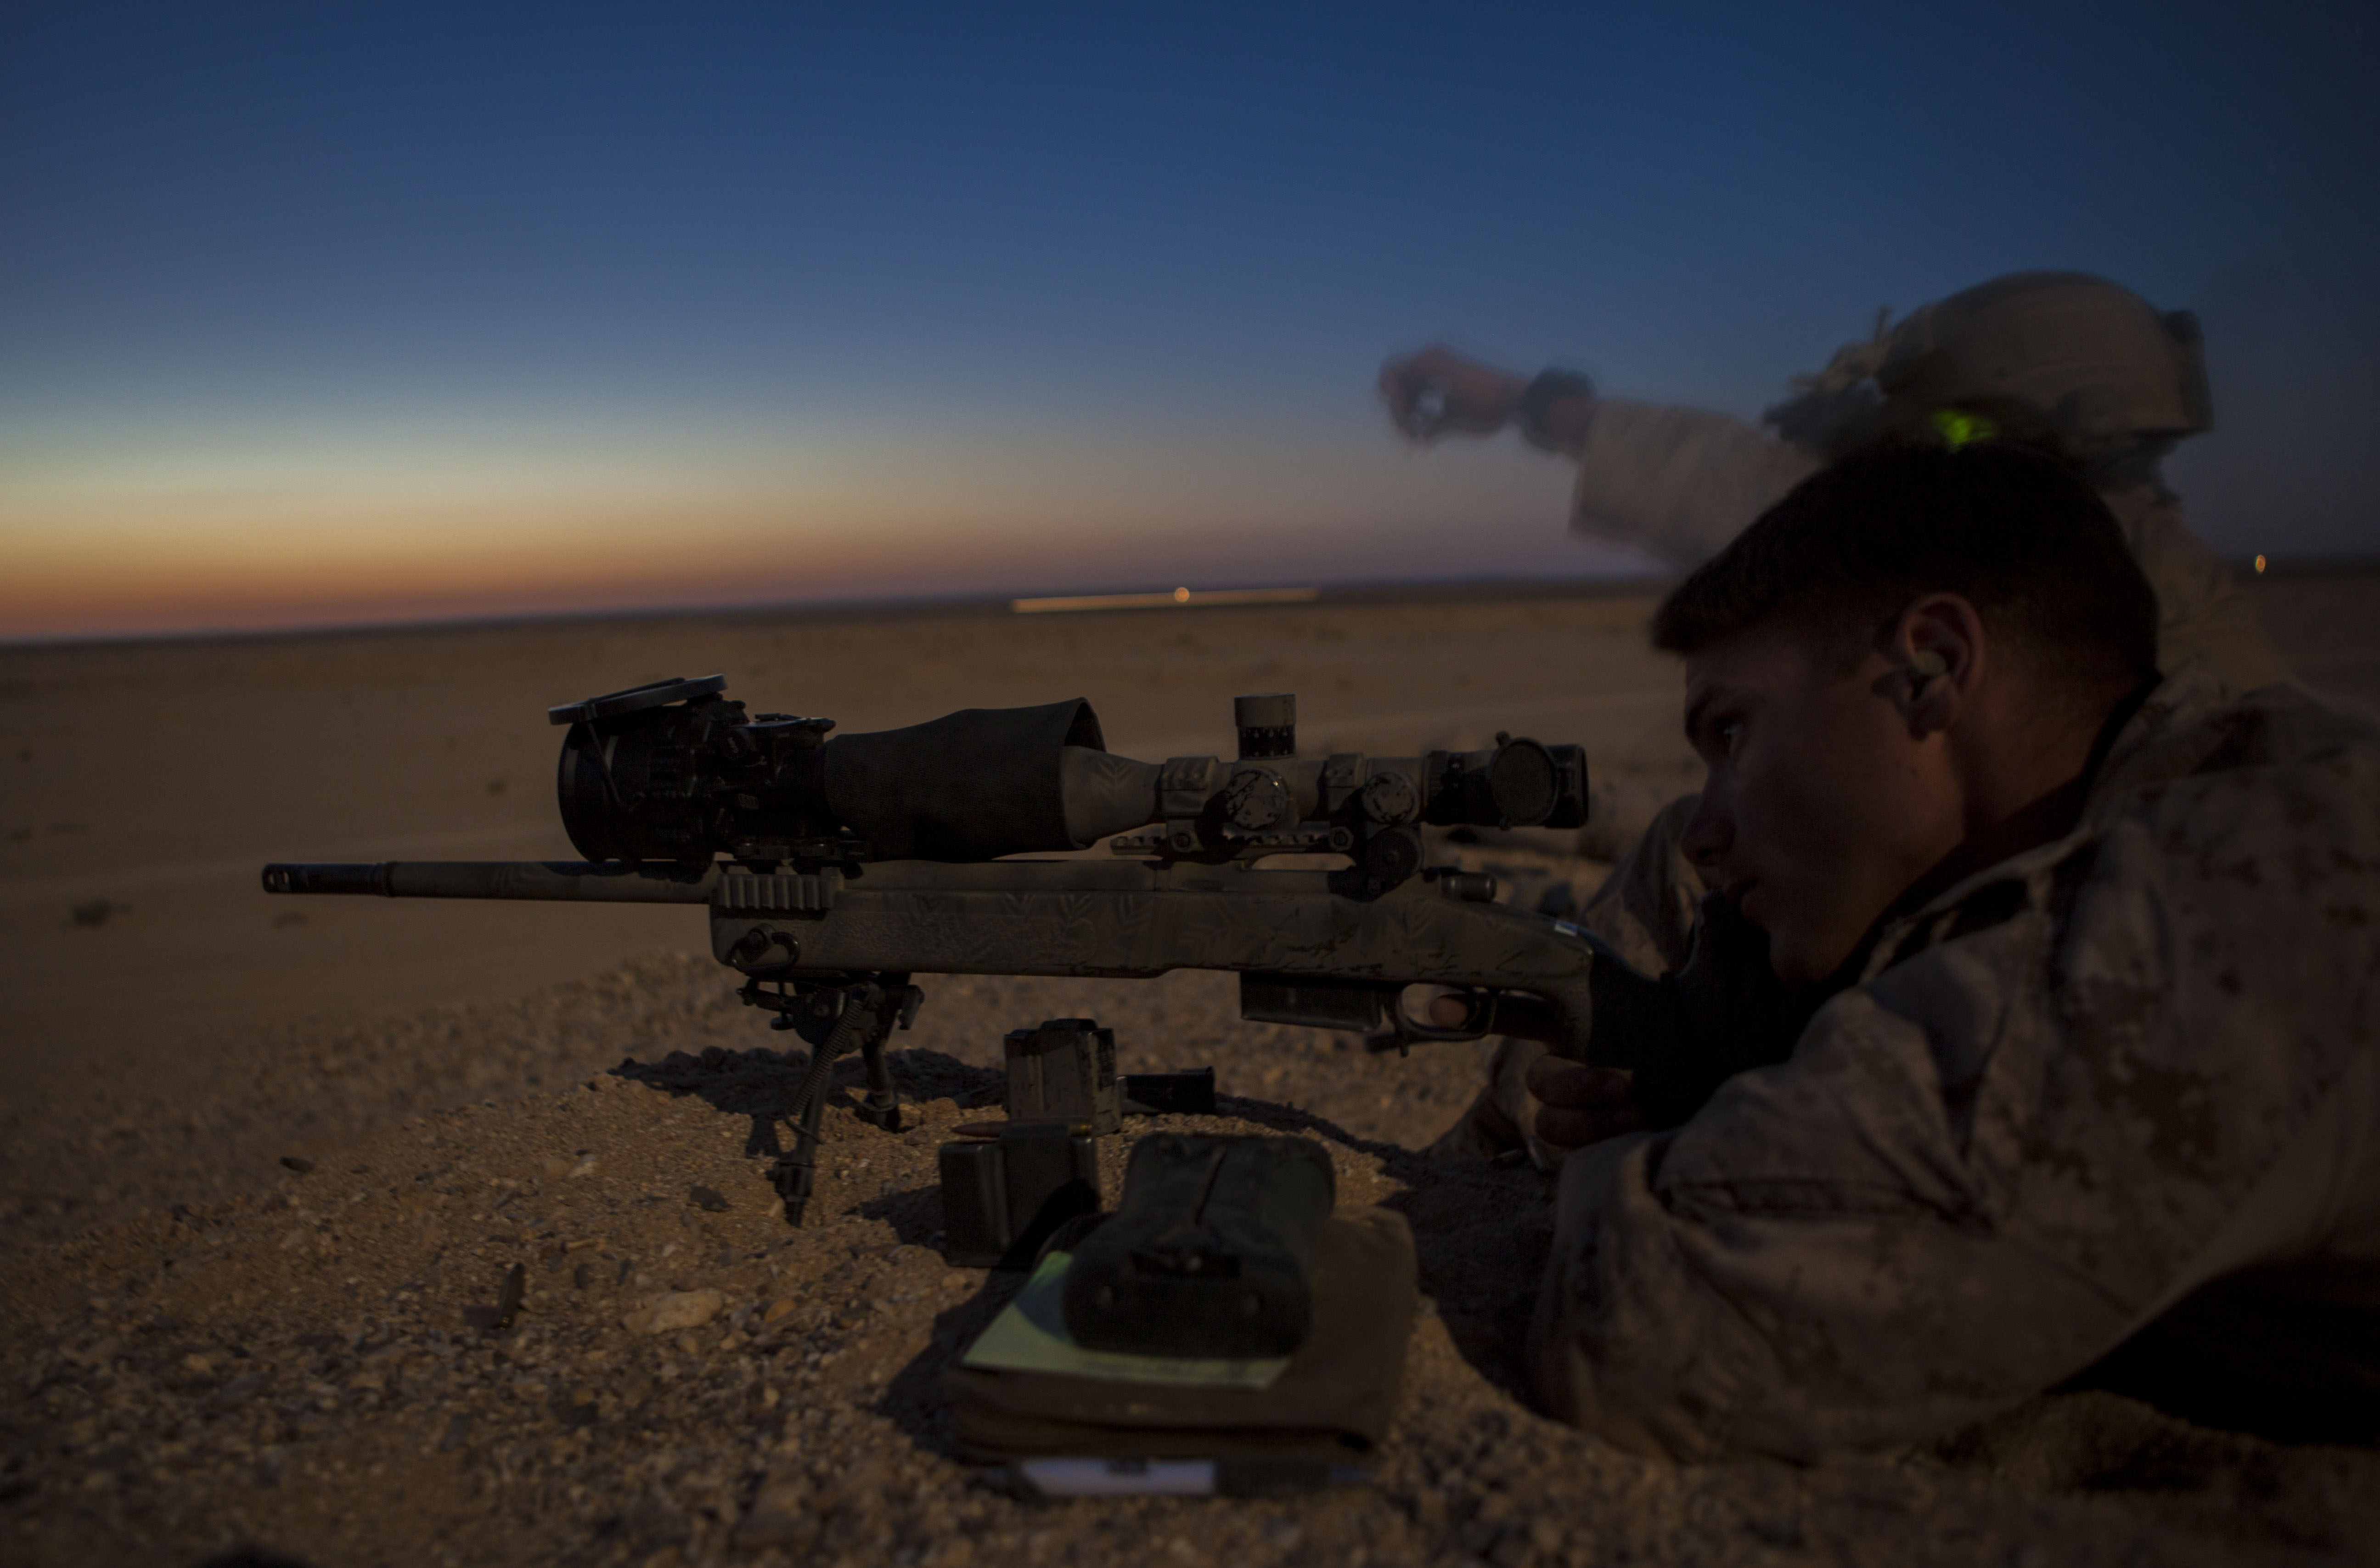 A_U.S._Marine_with_the_26th_Marine_Expeditionary_Unit_(MEU)_Maritime_Raid_Force_fires_an_M40_sniper_rifle_during_a_nighttime_live-fire_exercise_June_21,_2013,_in_Jordan_as_part_of_exercise_Eager_Lion_2013_130621-M-SO289-005.jpg